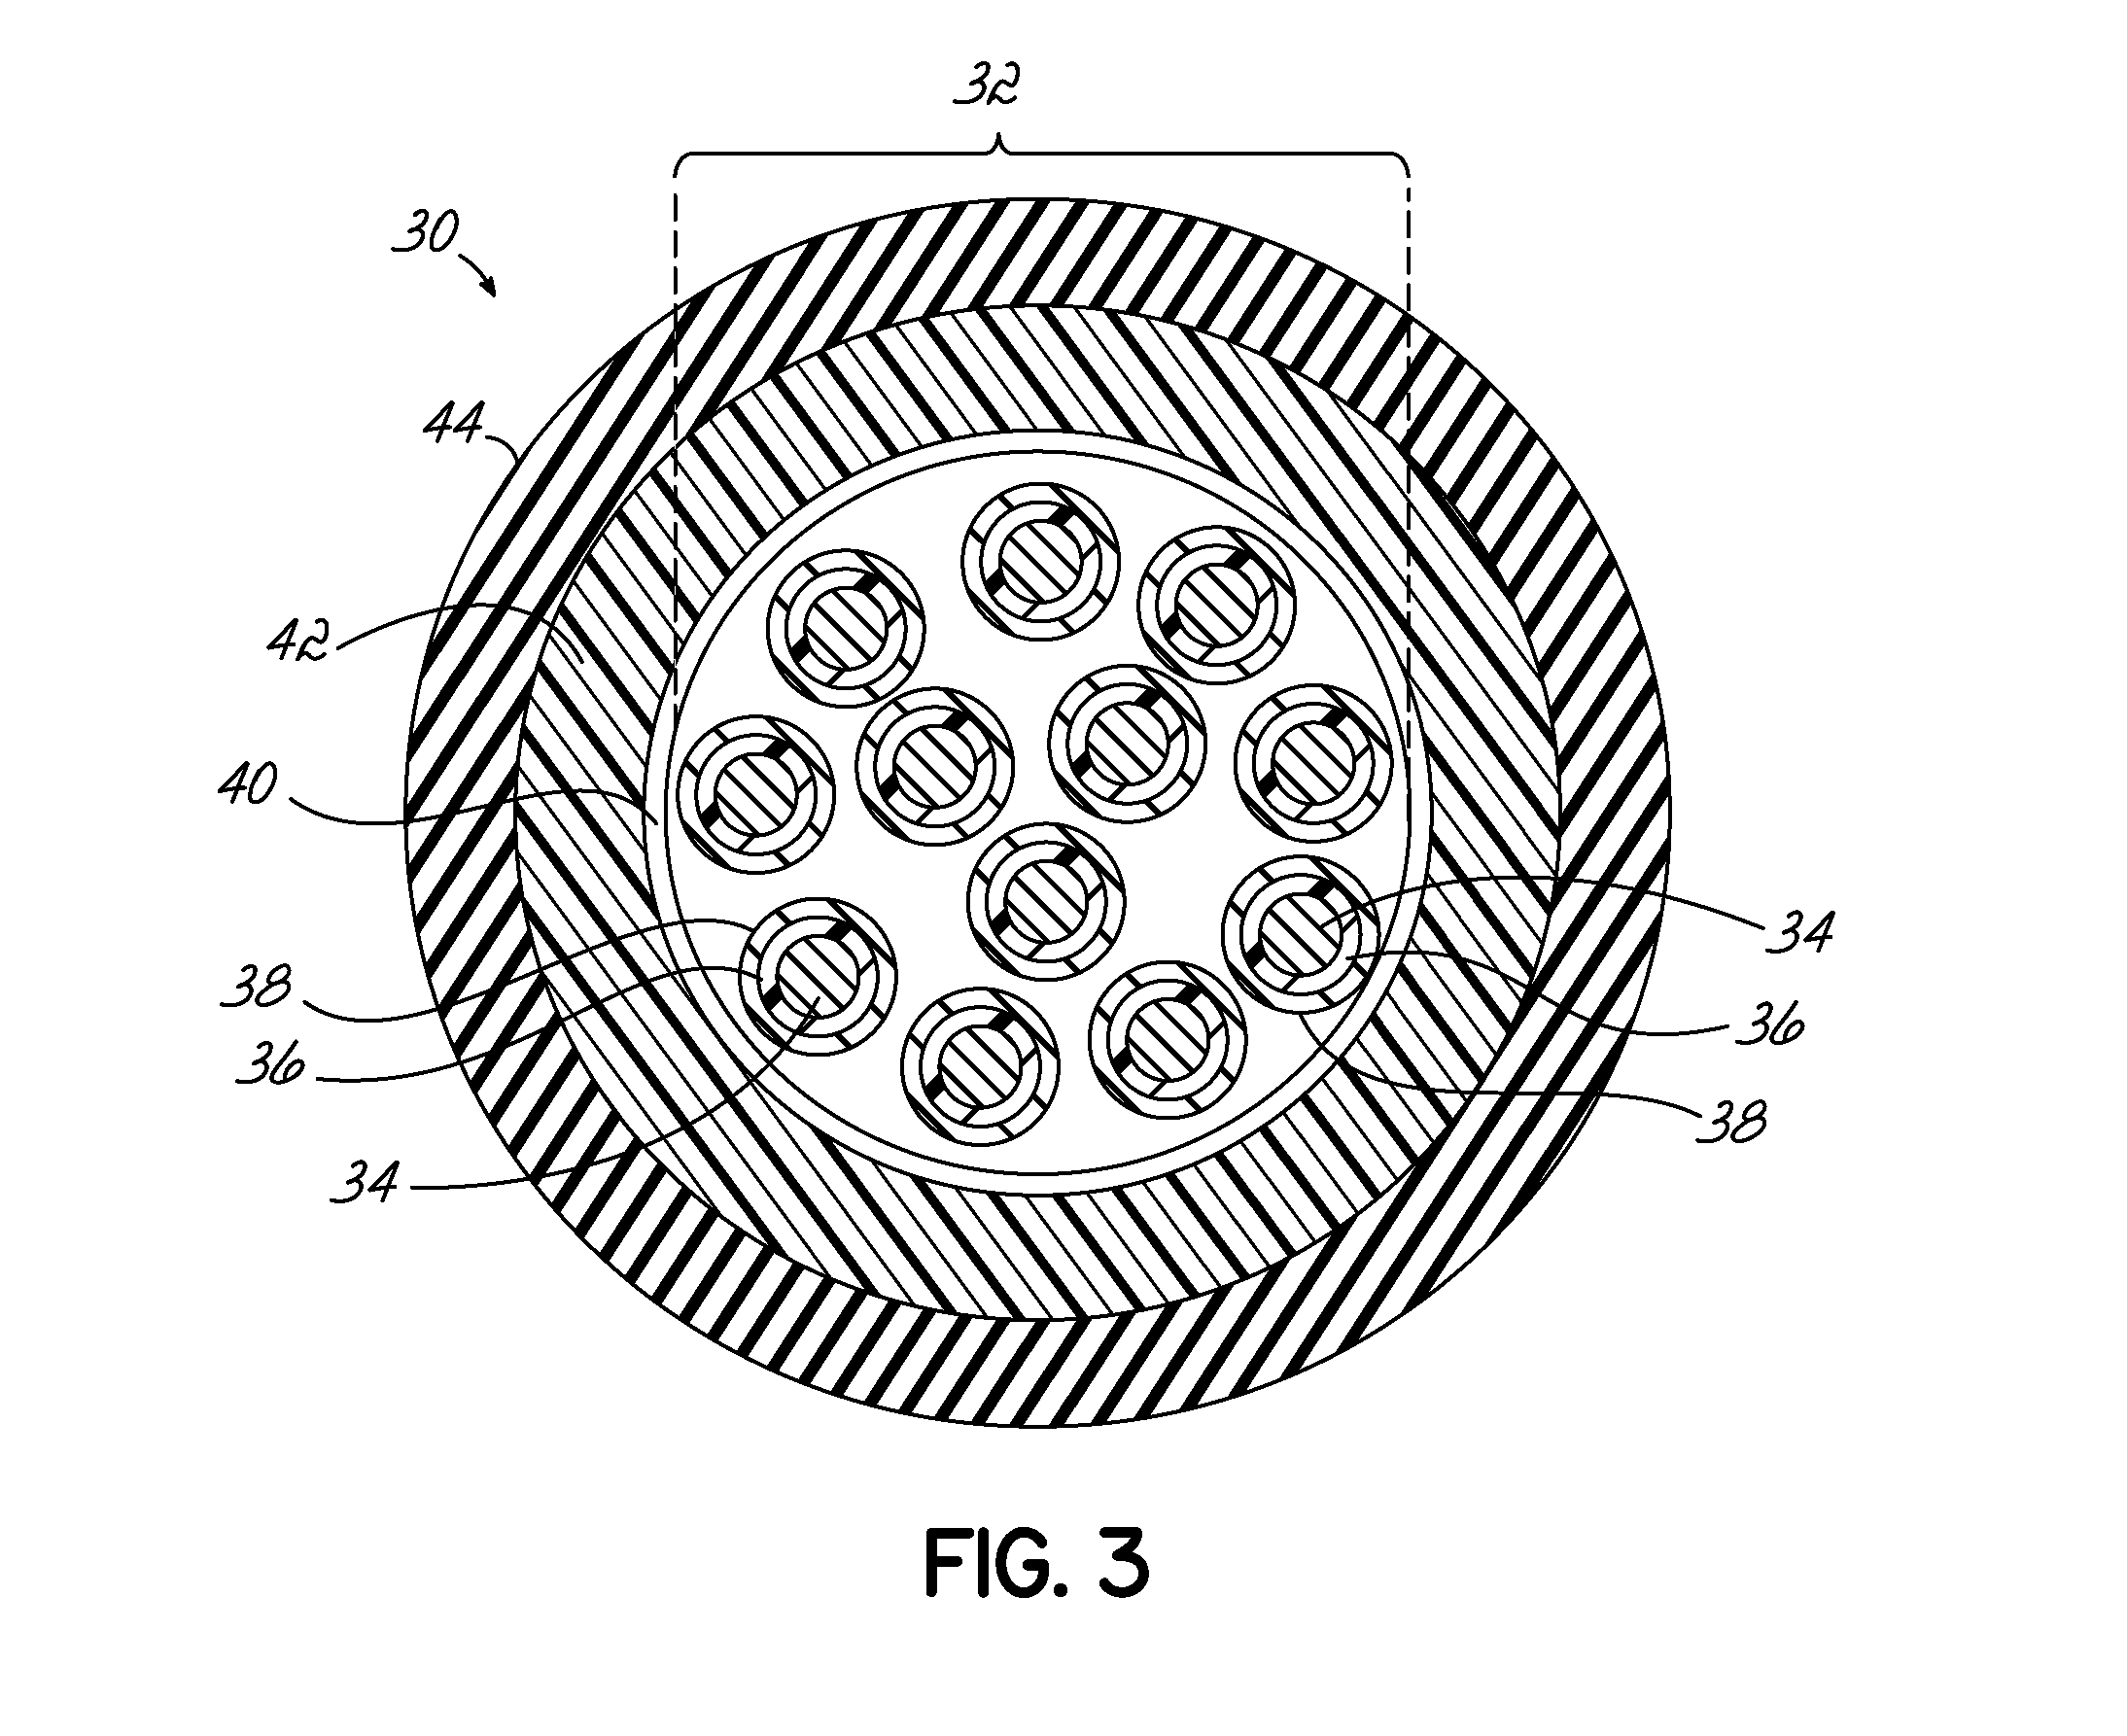 Fiber optic cable and method of manufacture